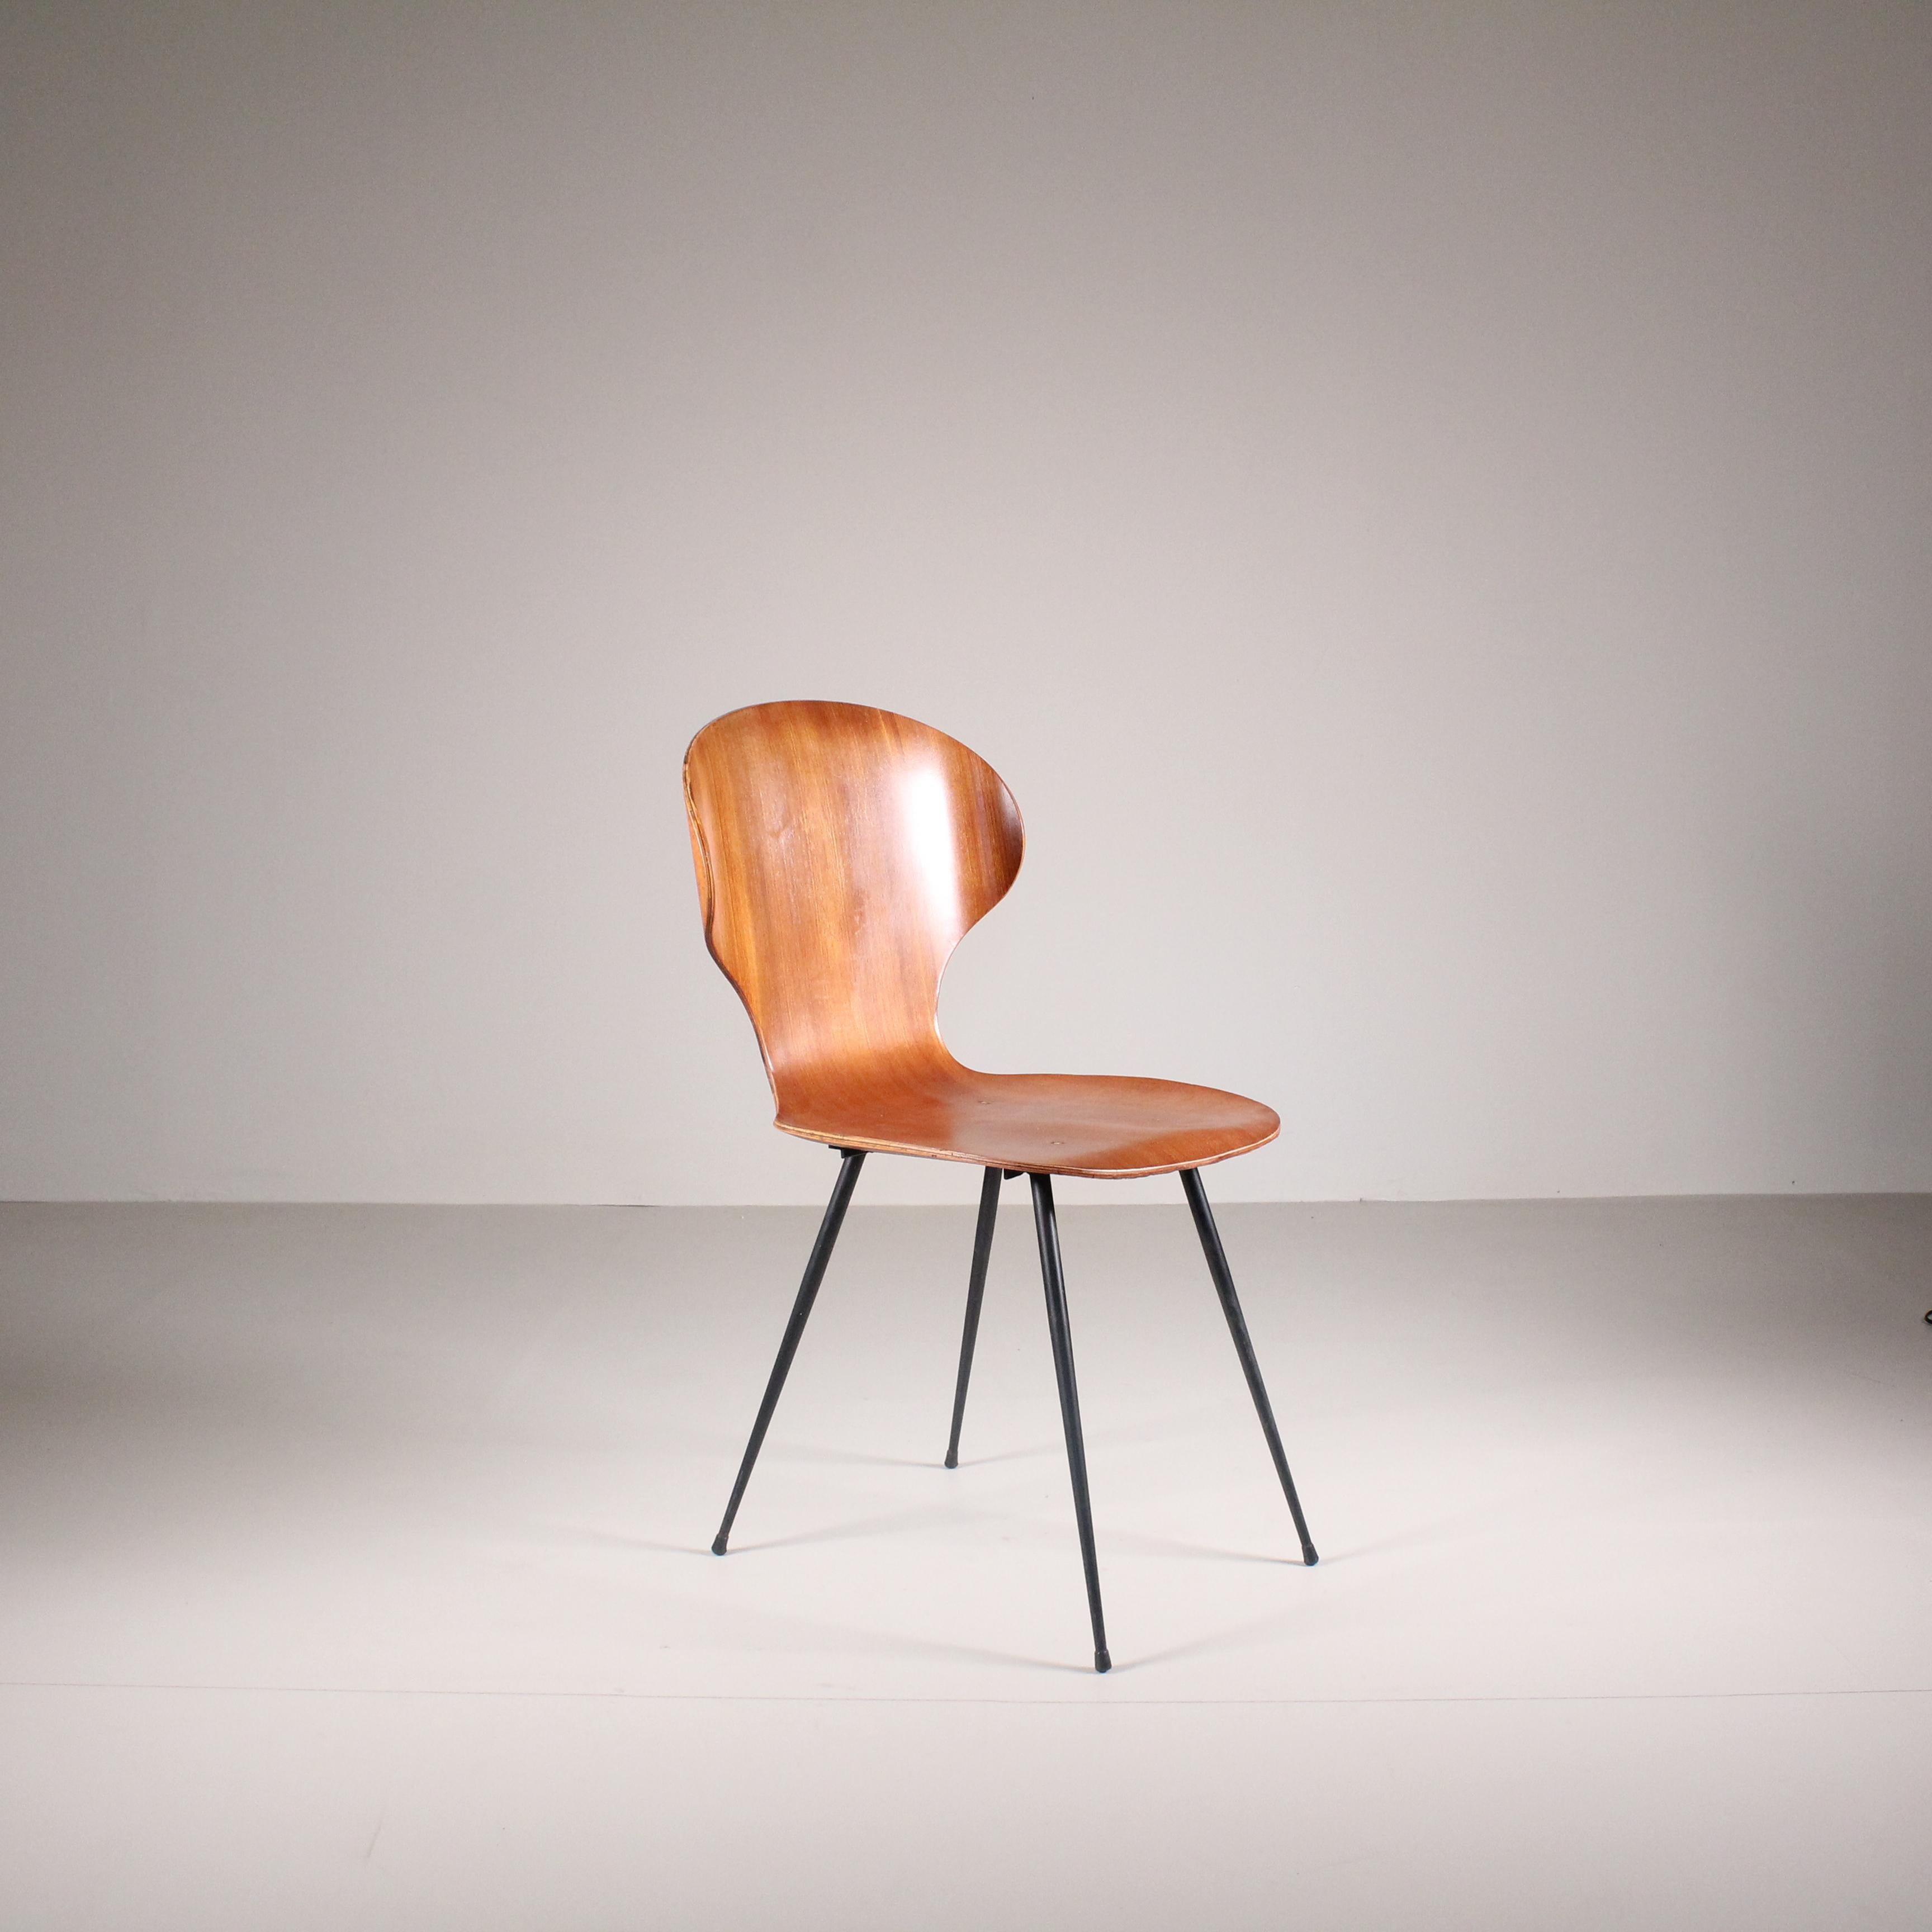 20th Century Set of 4 Lulli Chairs, Carlo Ratti, Curved Woods Industry, 1950s For Sale